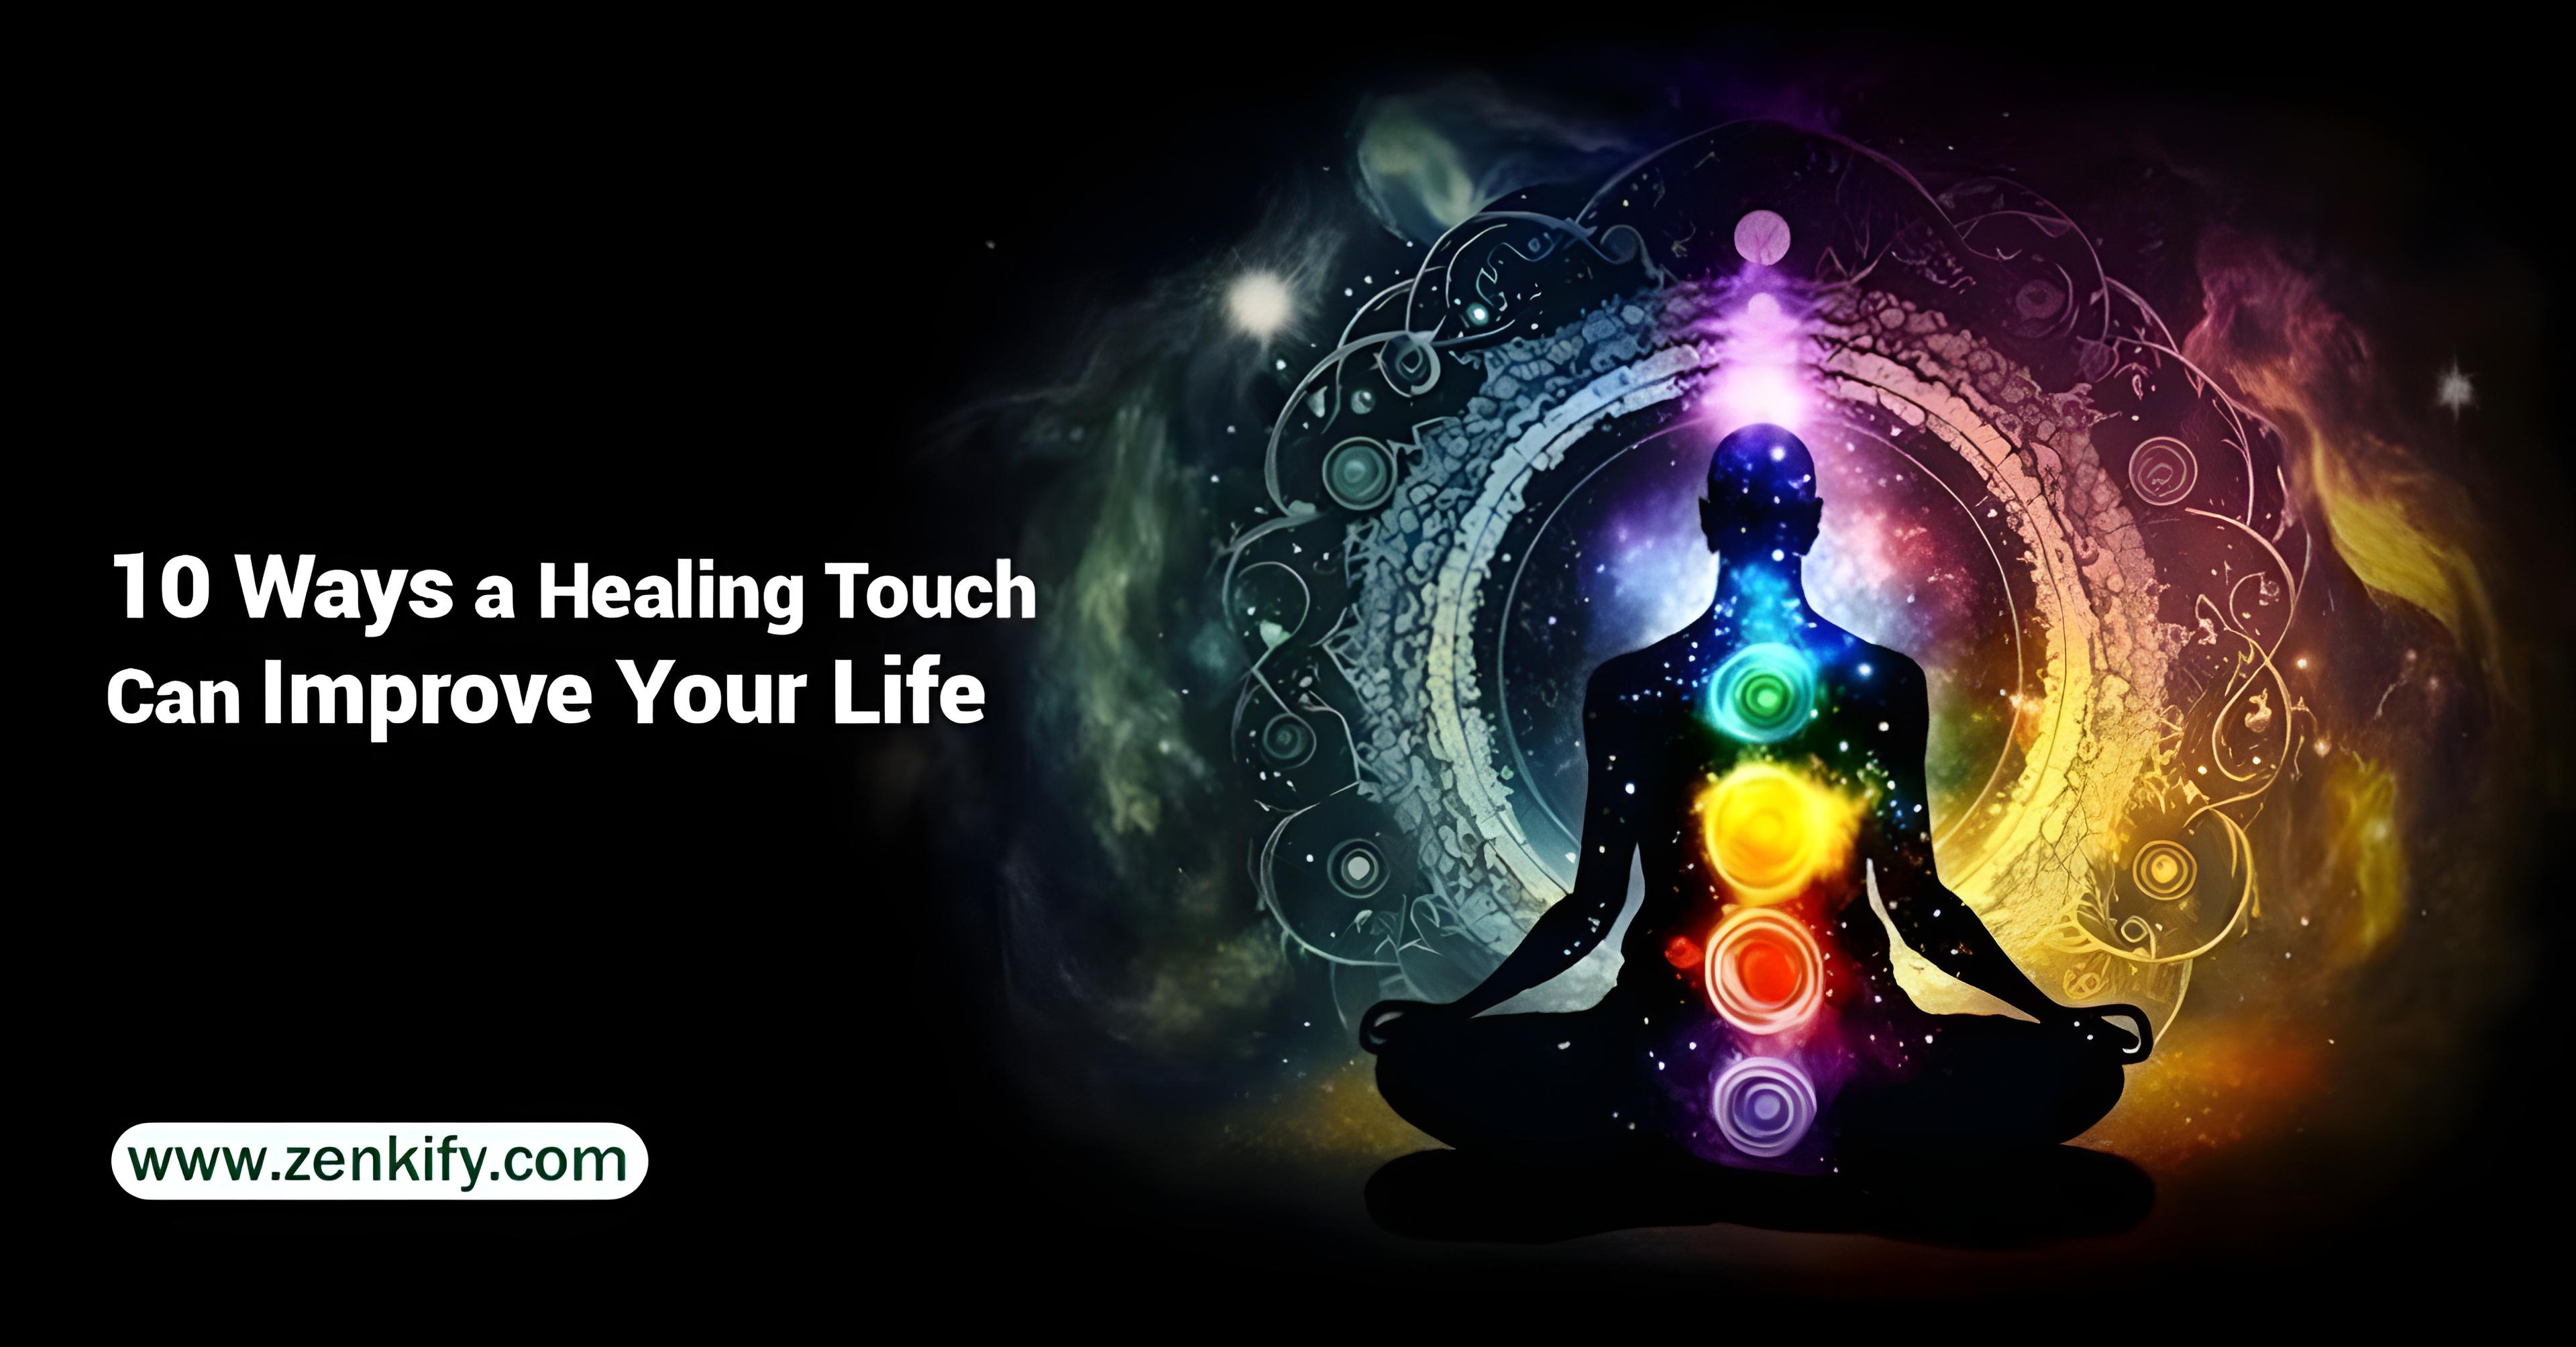 10 Ways a Healing Touch Can Improve Your Life